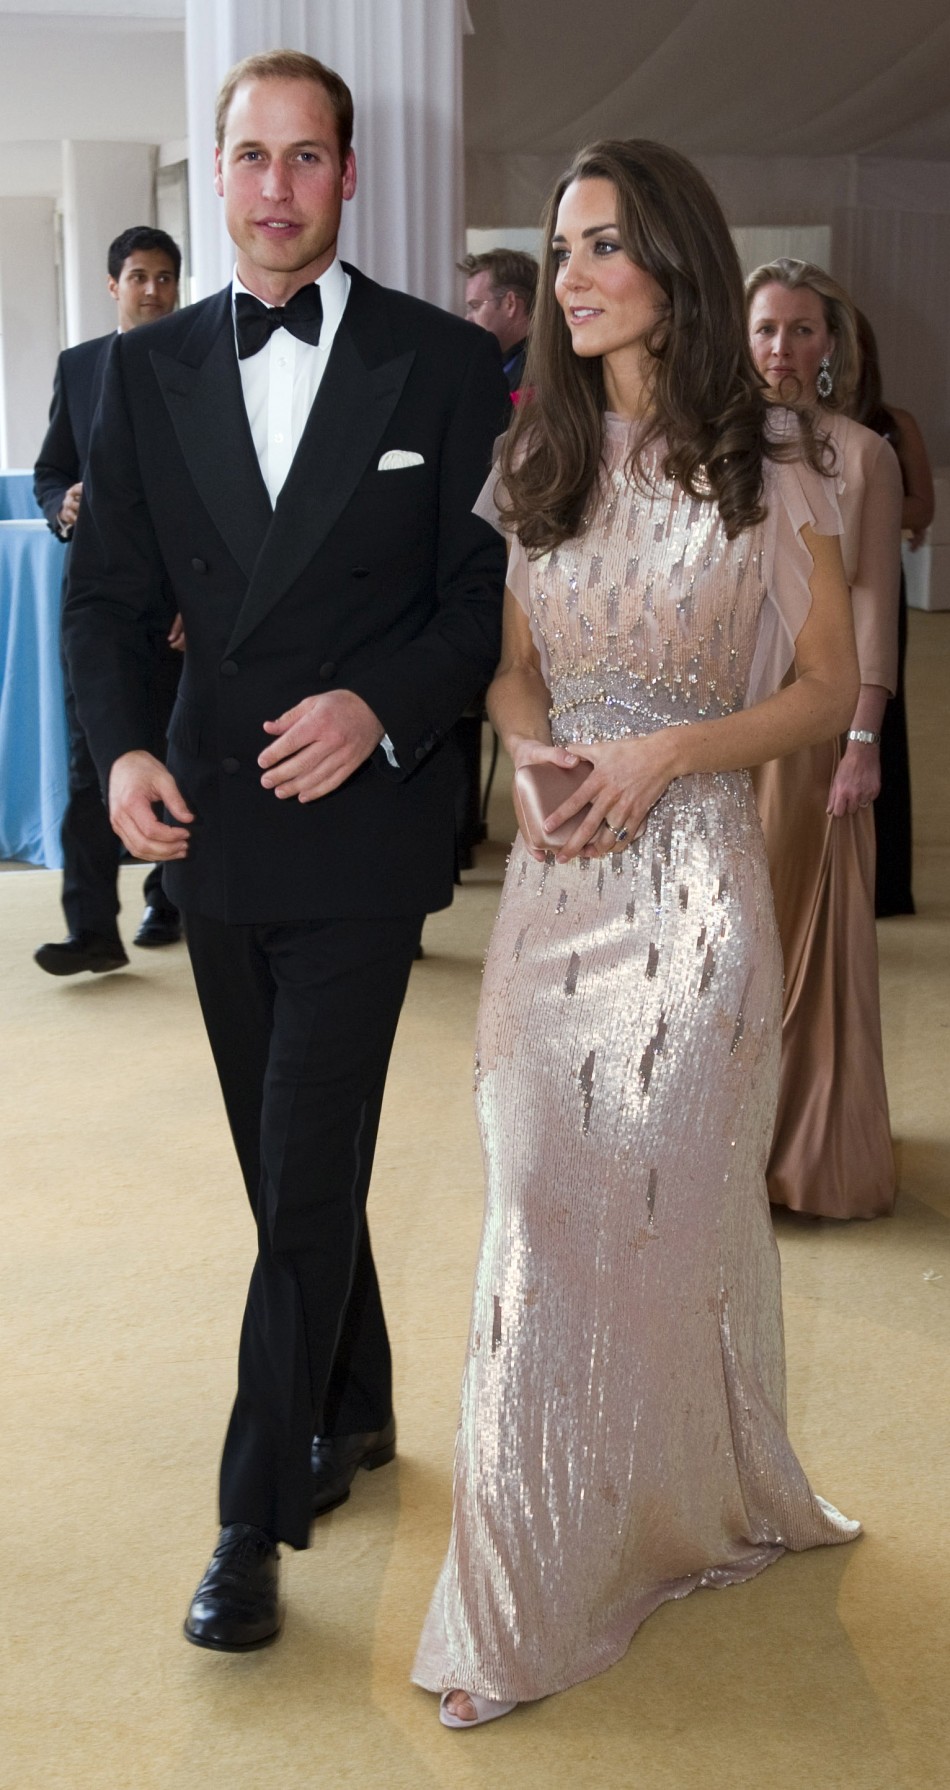 Britains Prince William and his wife Catherine, Duchess of Cambridge arrive at ARK gala dinner at Kensington Palace in London